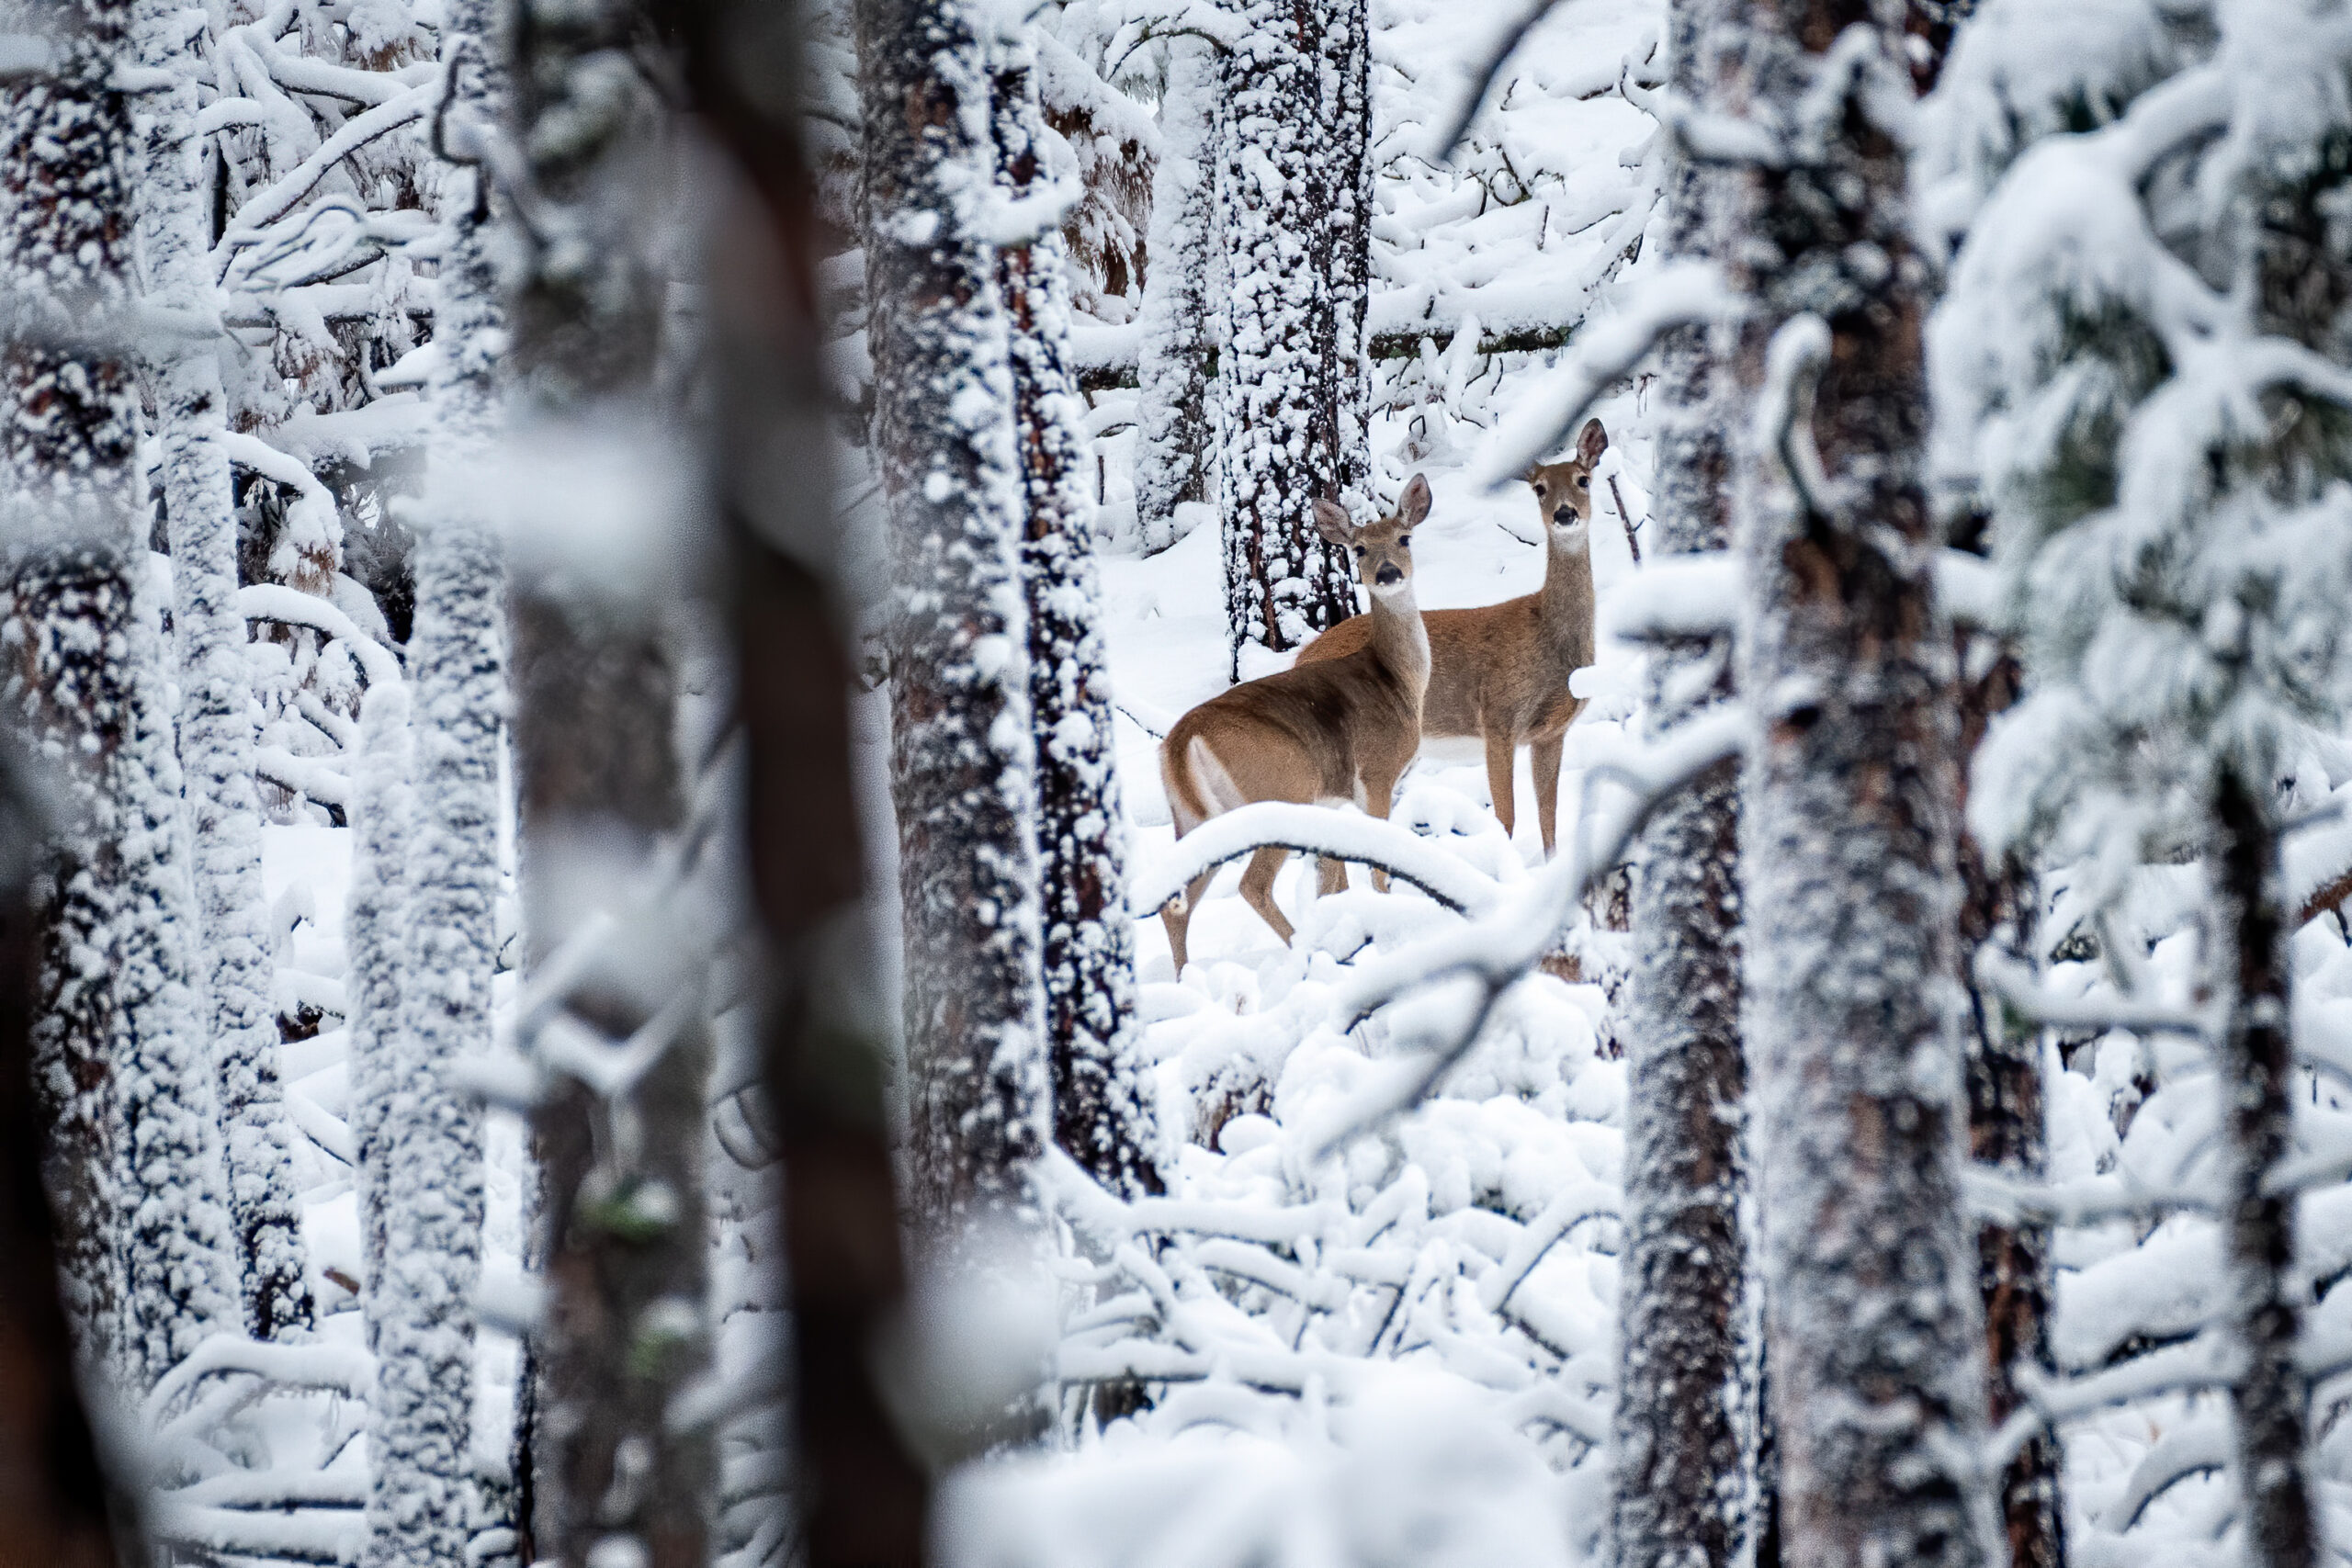 Snow makes life difficult for deer